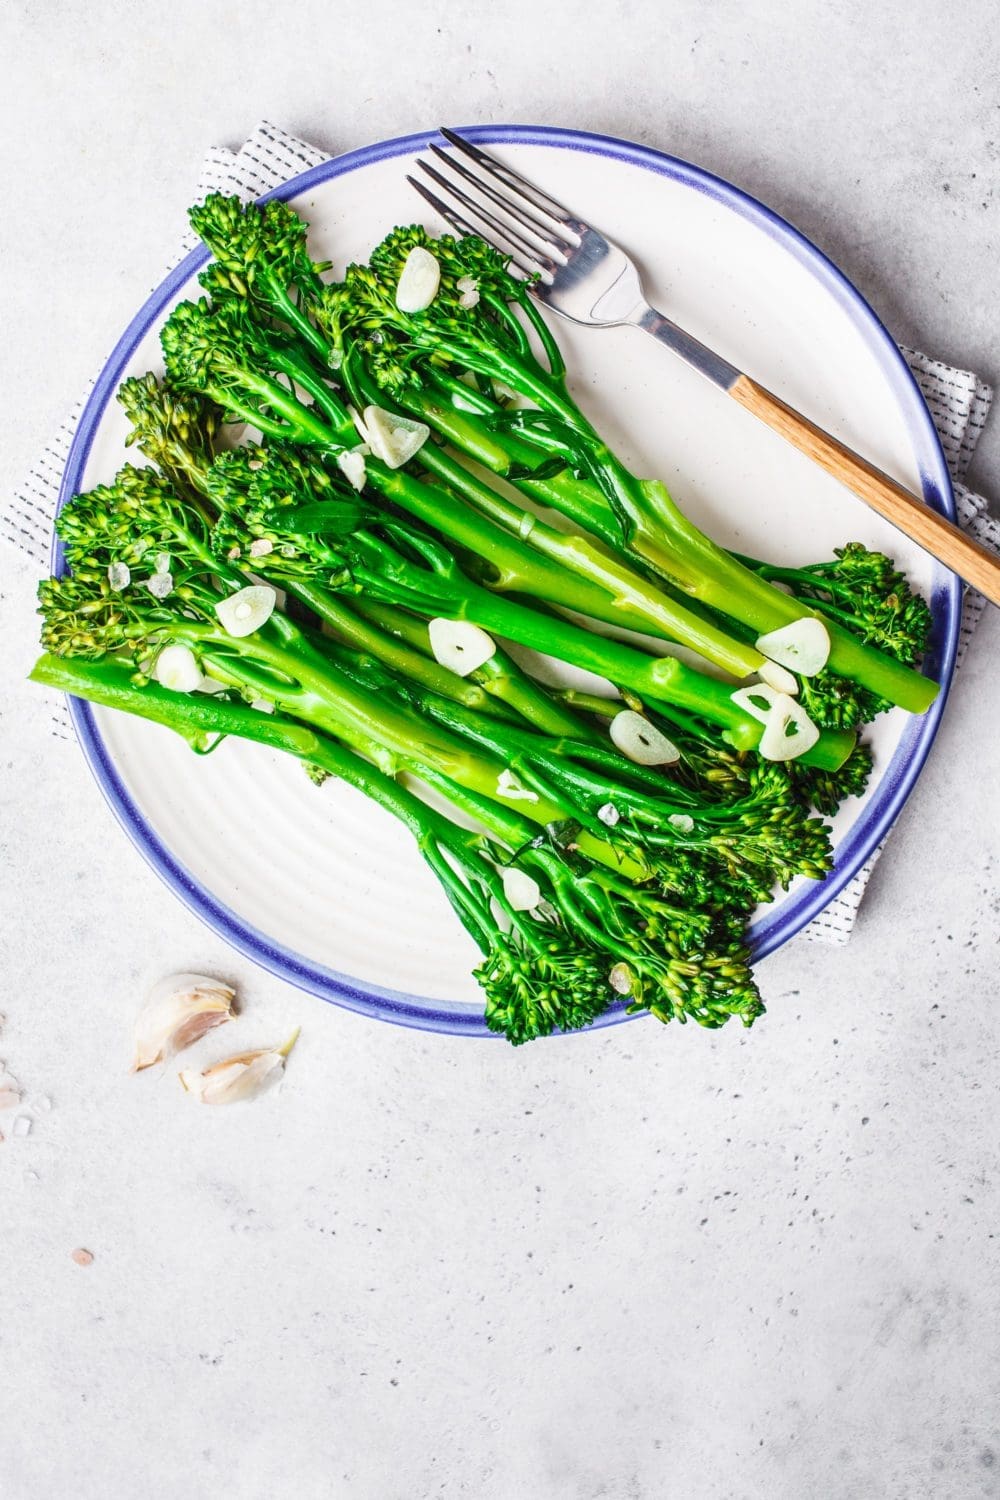 Oven Roasted Broccolini with Garlic and Lemon - Healthy Shrimp Side Dishes